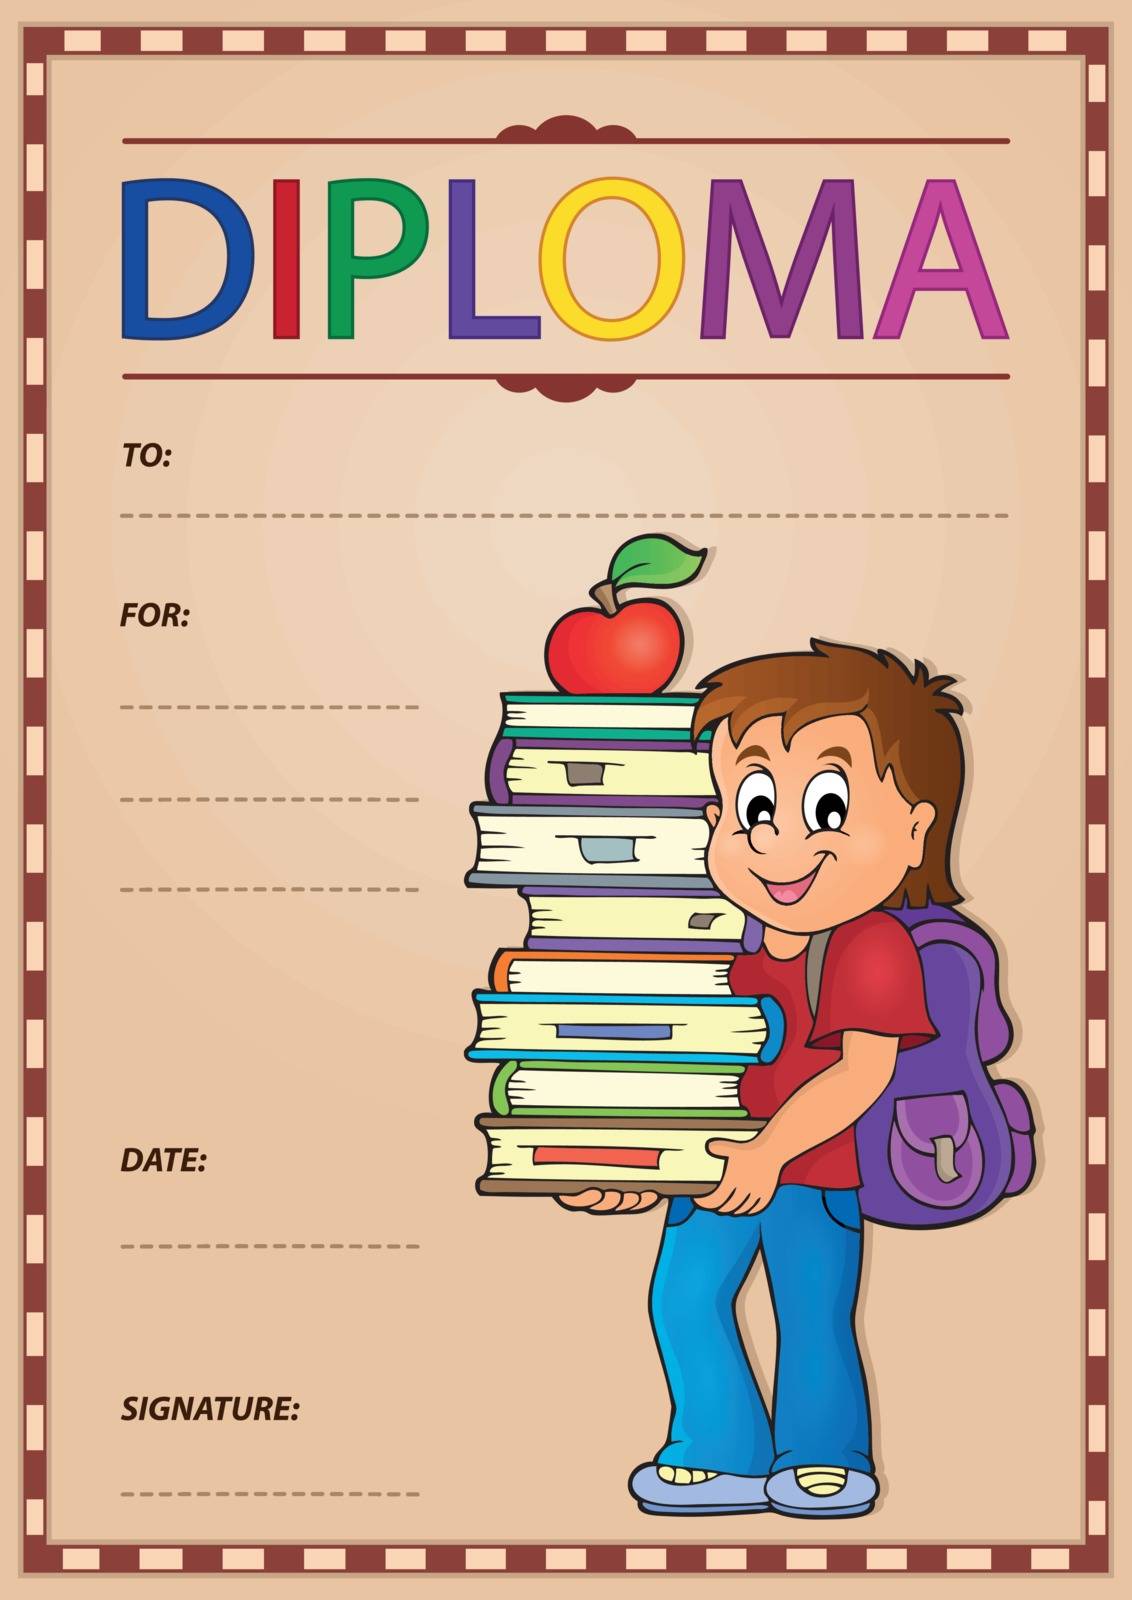 Diploma composition image 3 by clairev